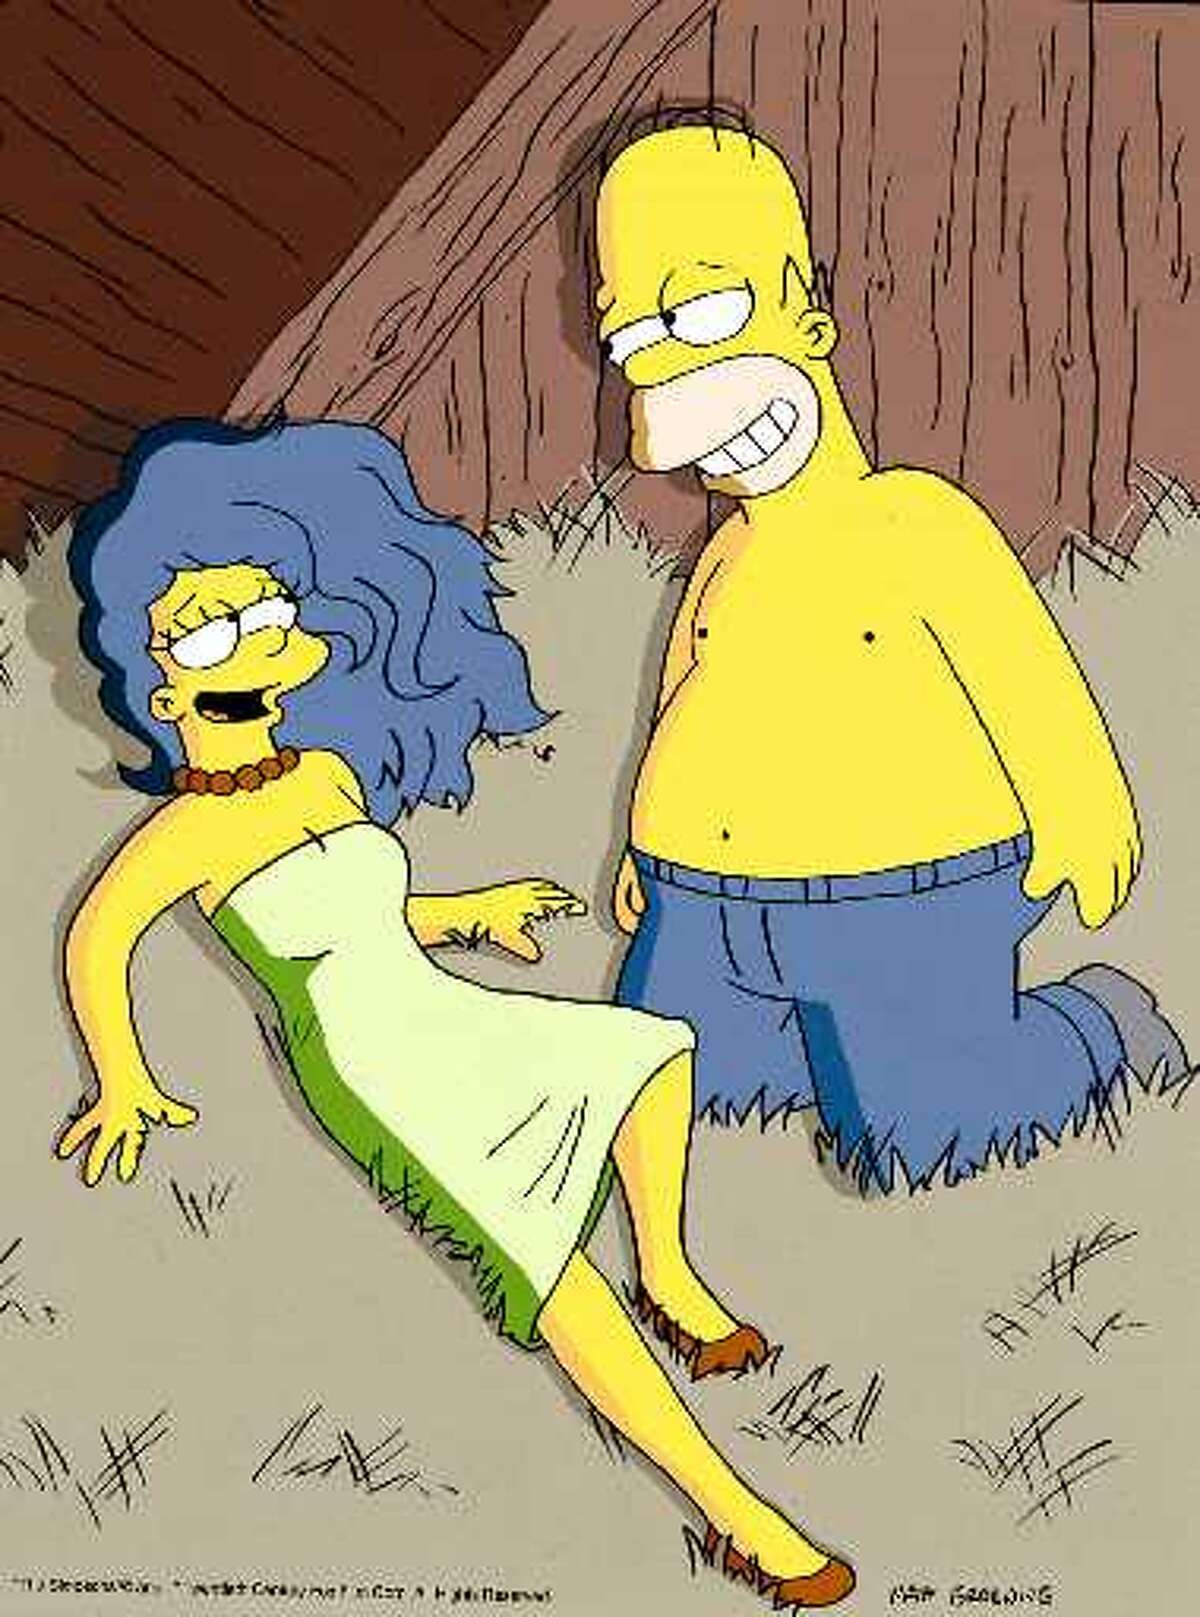 THE SIMPSONS: THE OUTLAWS - Marge lets her hair down (a la Jane Russell) wh...